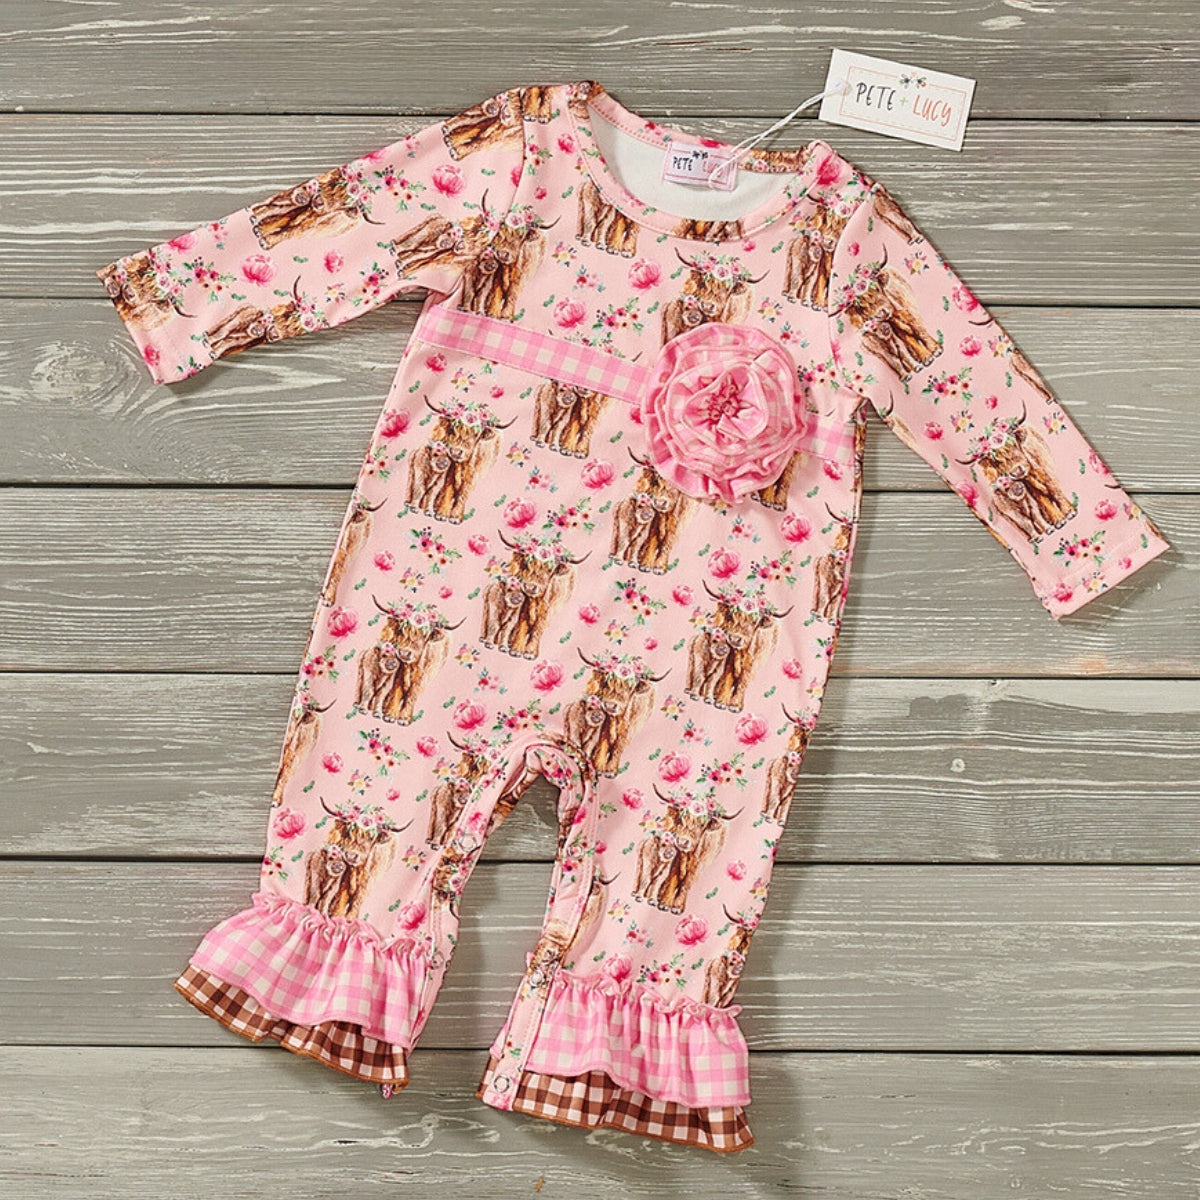 Cows and Roses + Sibling - Girl Infant Romper